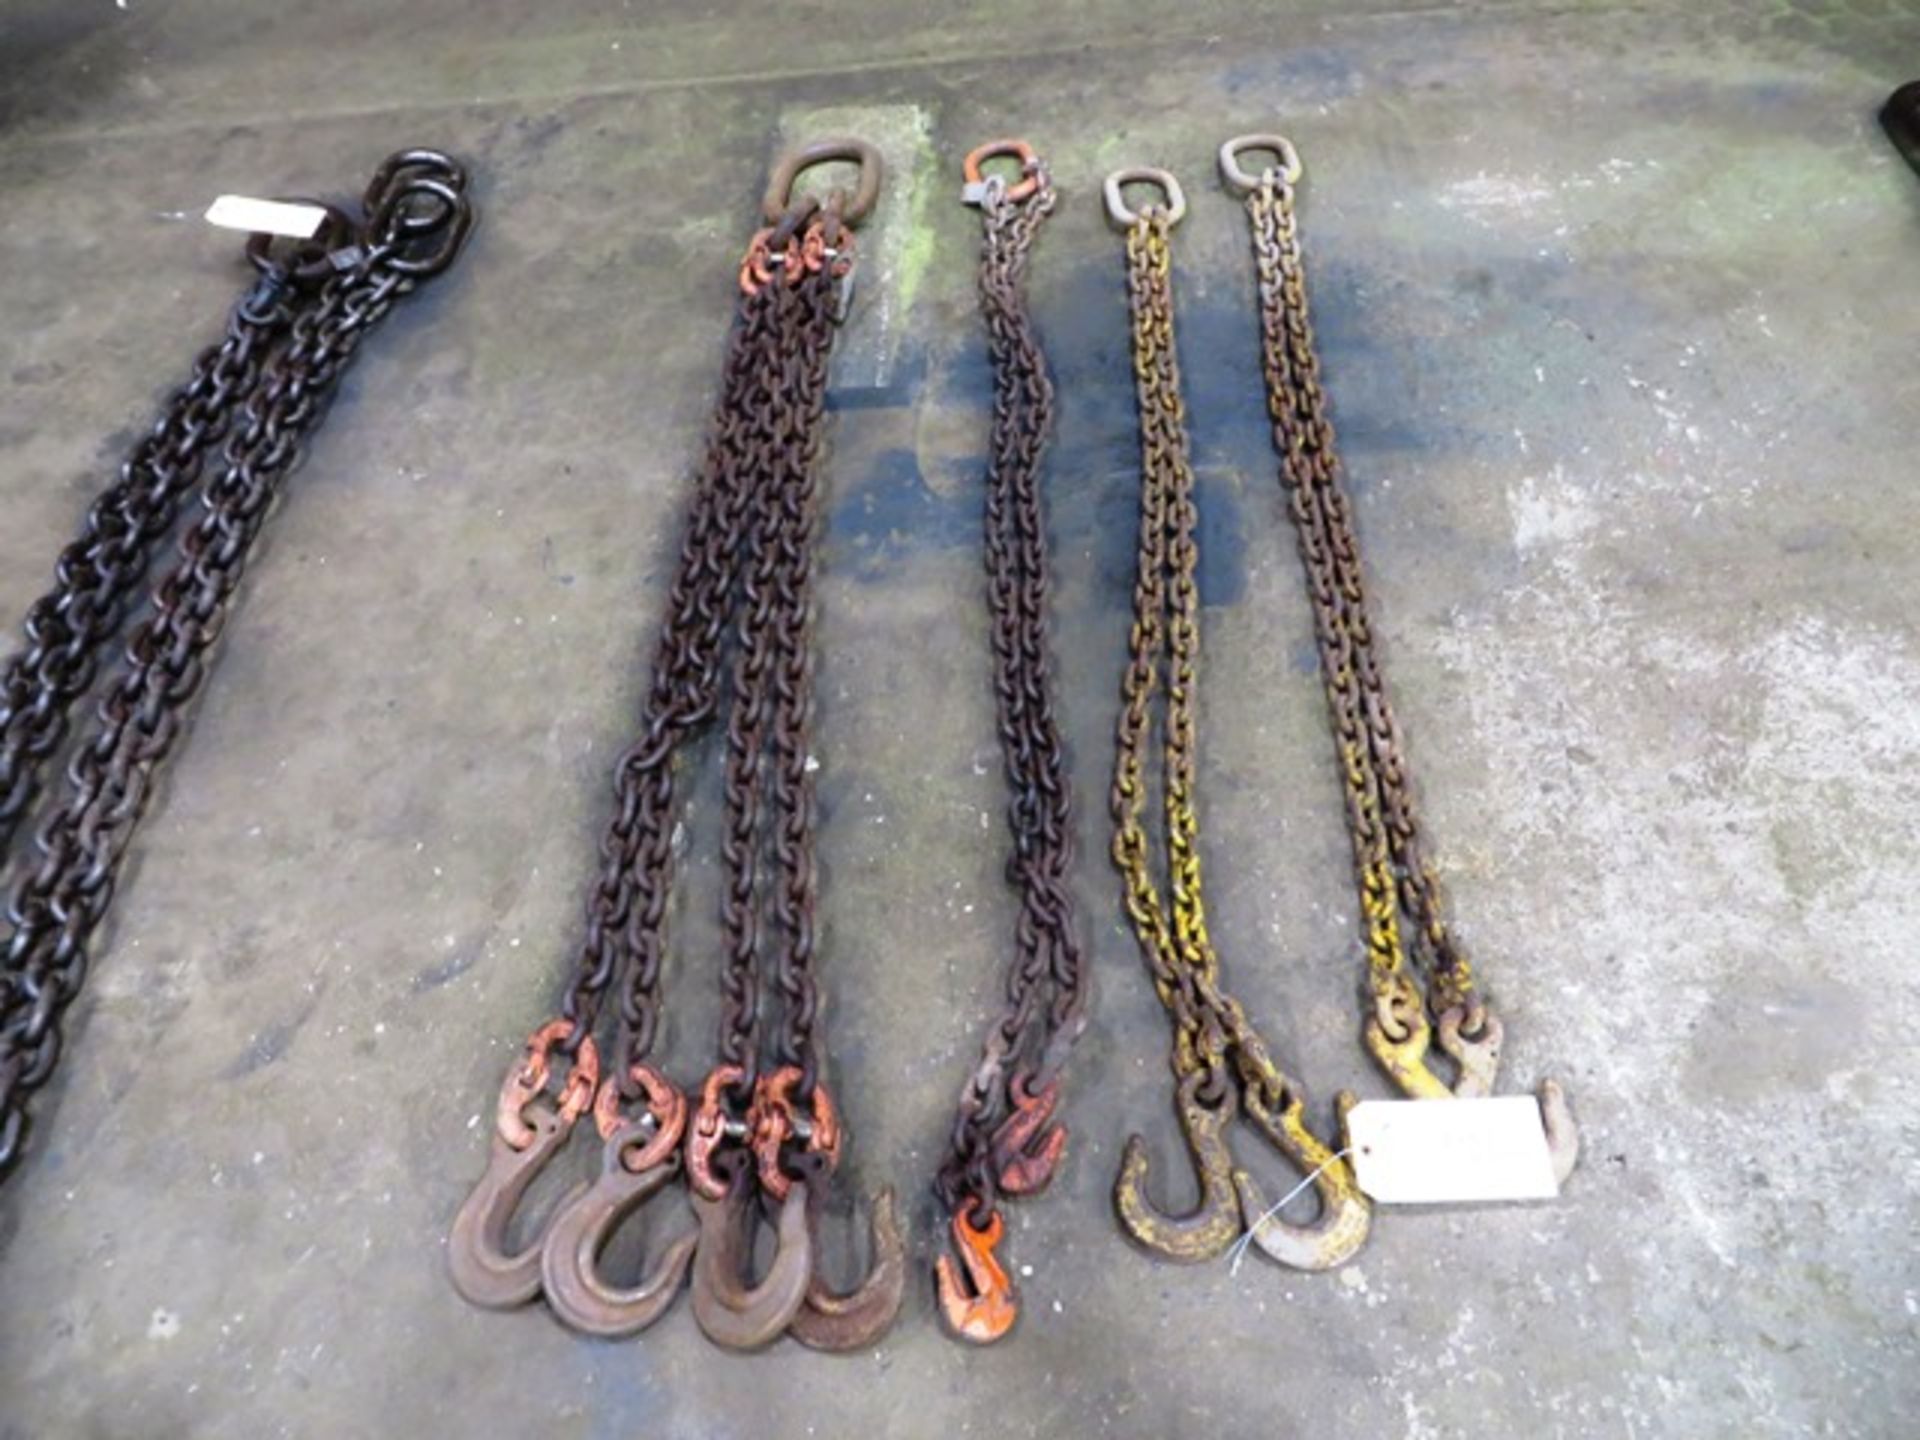 (4) Assorted Hook Lifting Chains